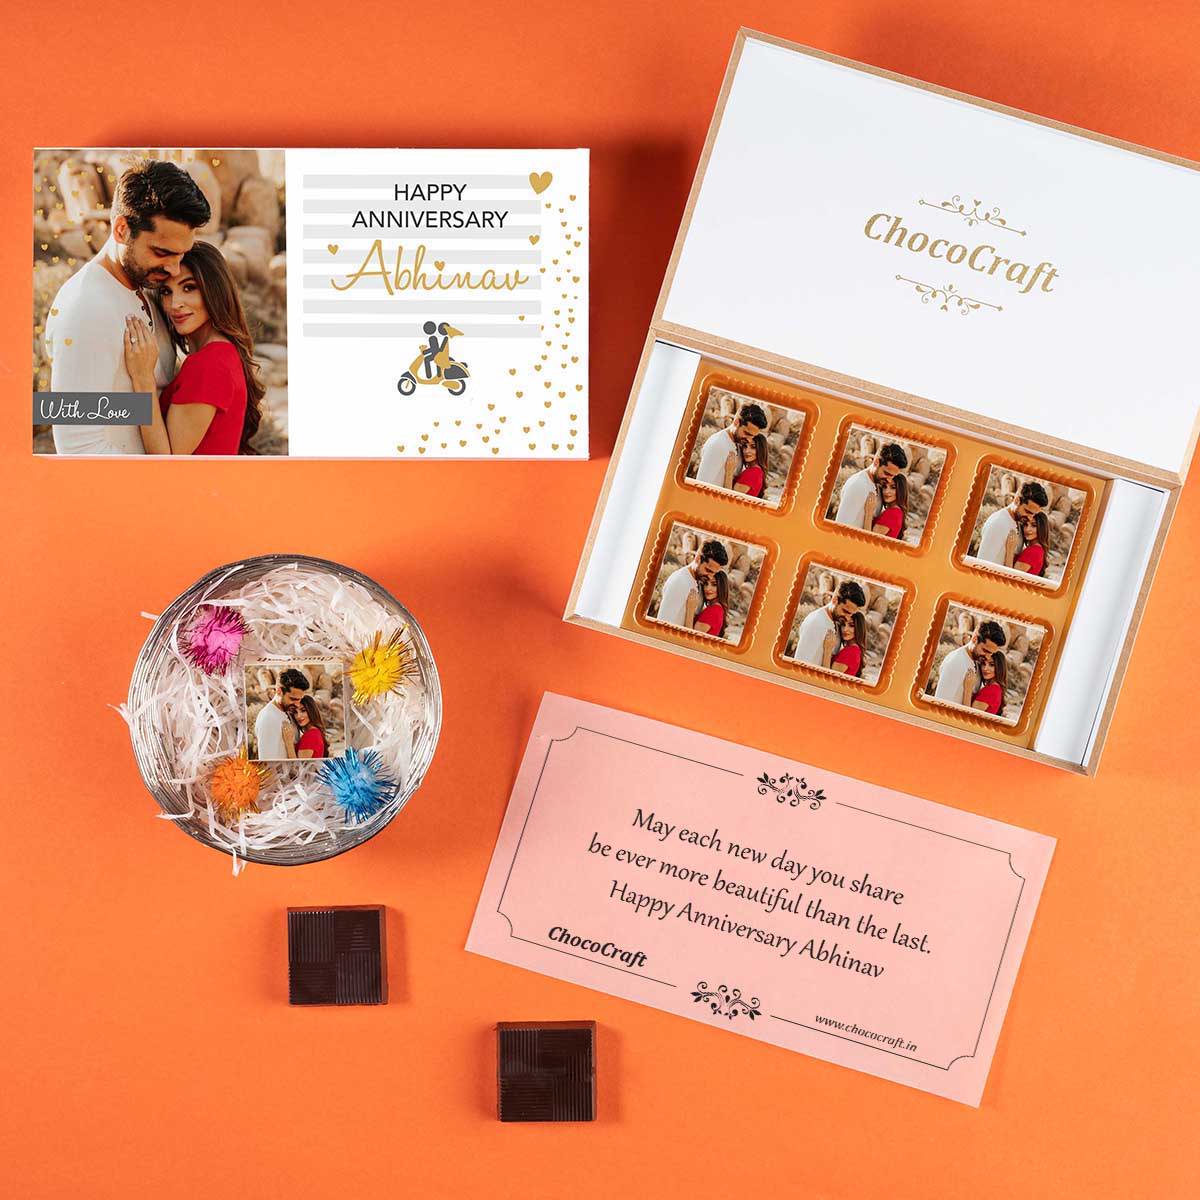 25th Anniversary Message For Couple – CHOCOCRAFT